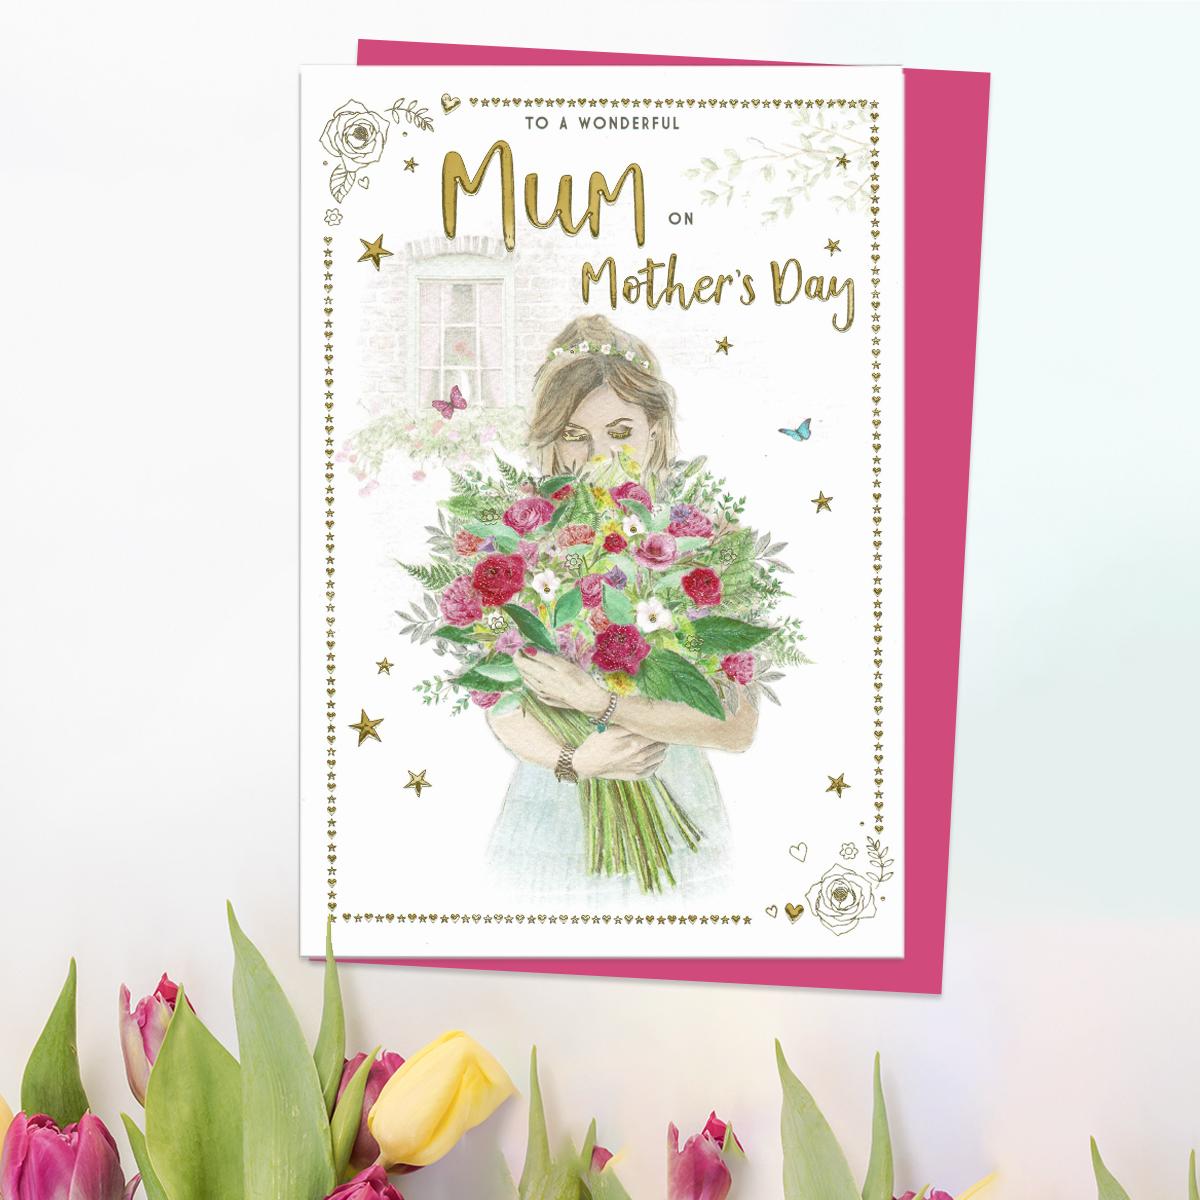 ' To A Wonderful Mum On Mother's Day' Card Featuring A Lady With Huge Bunch Of Flowers! With Beautiful Gold Foiling Detail And Cerise Envelope